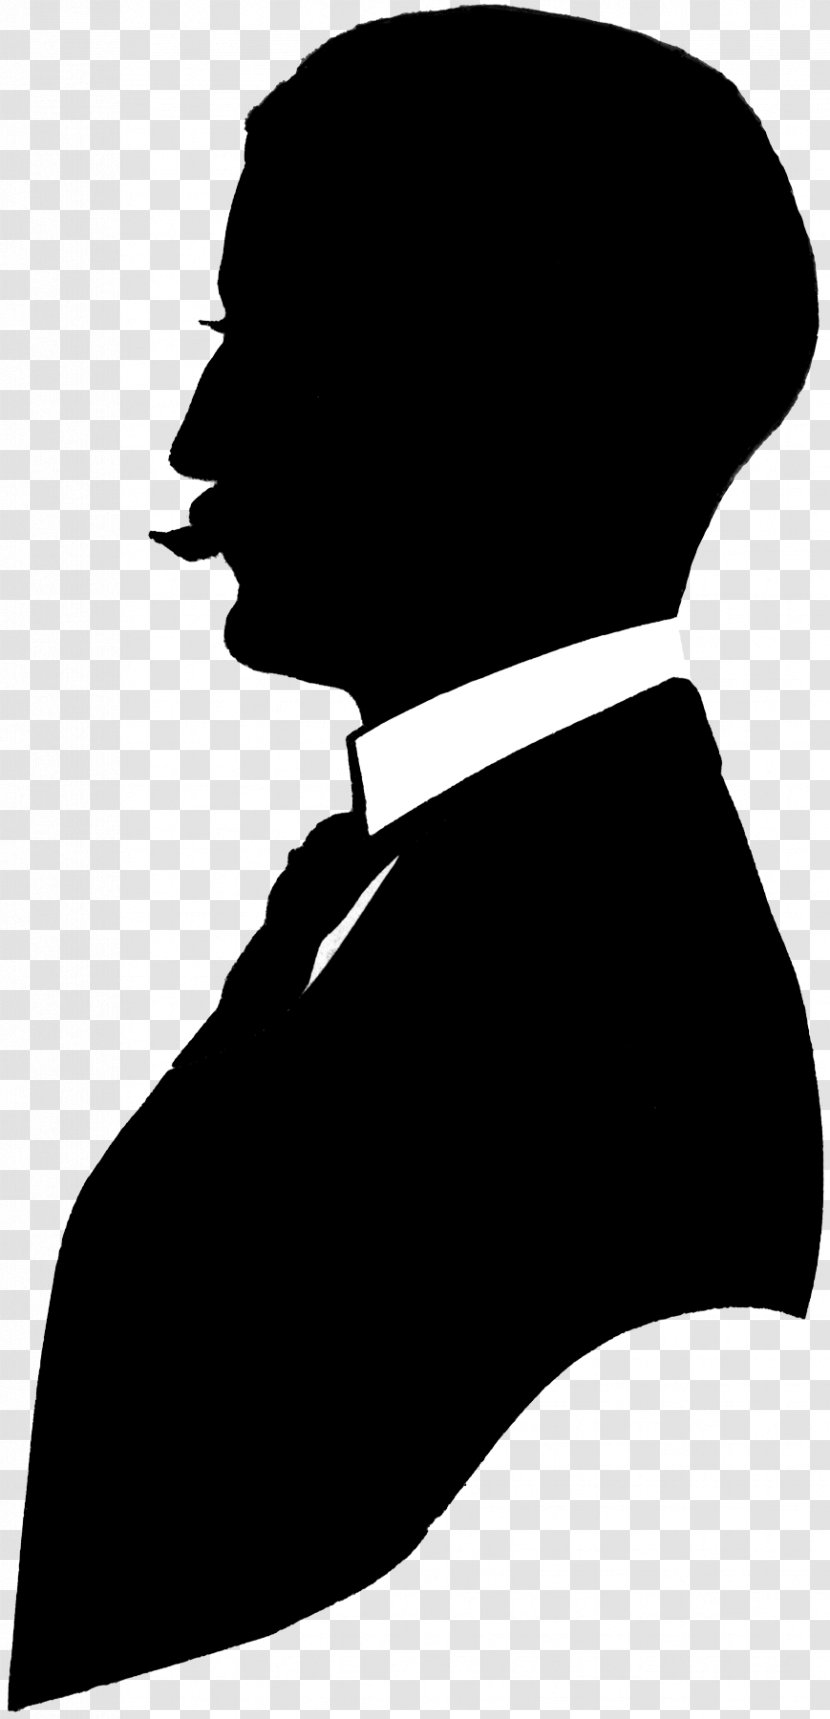 Monochrome Photography Black And White Silhouette - Gentleman Transparent PNG